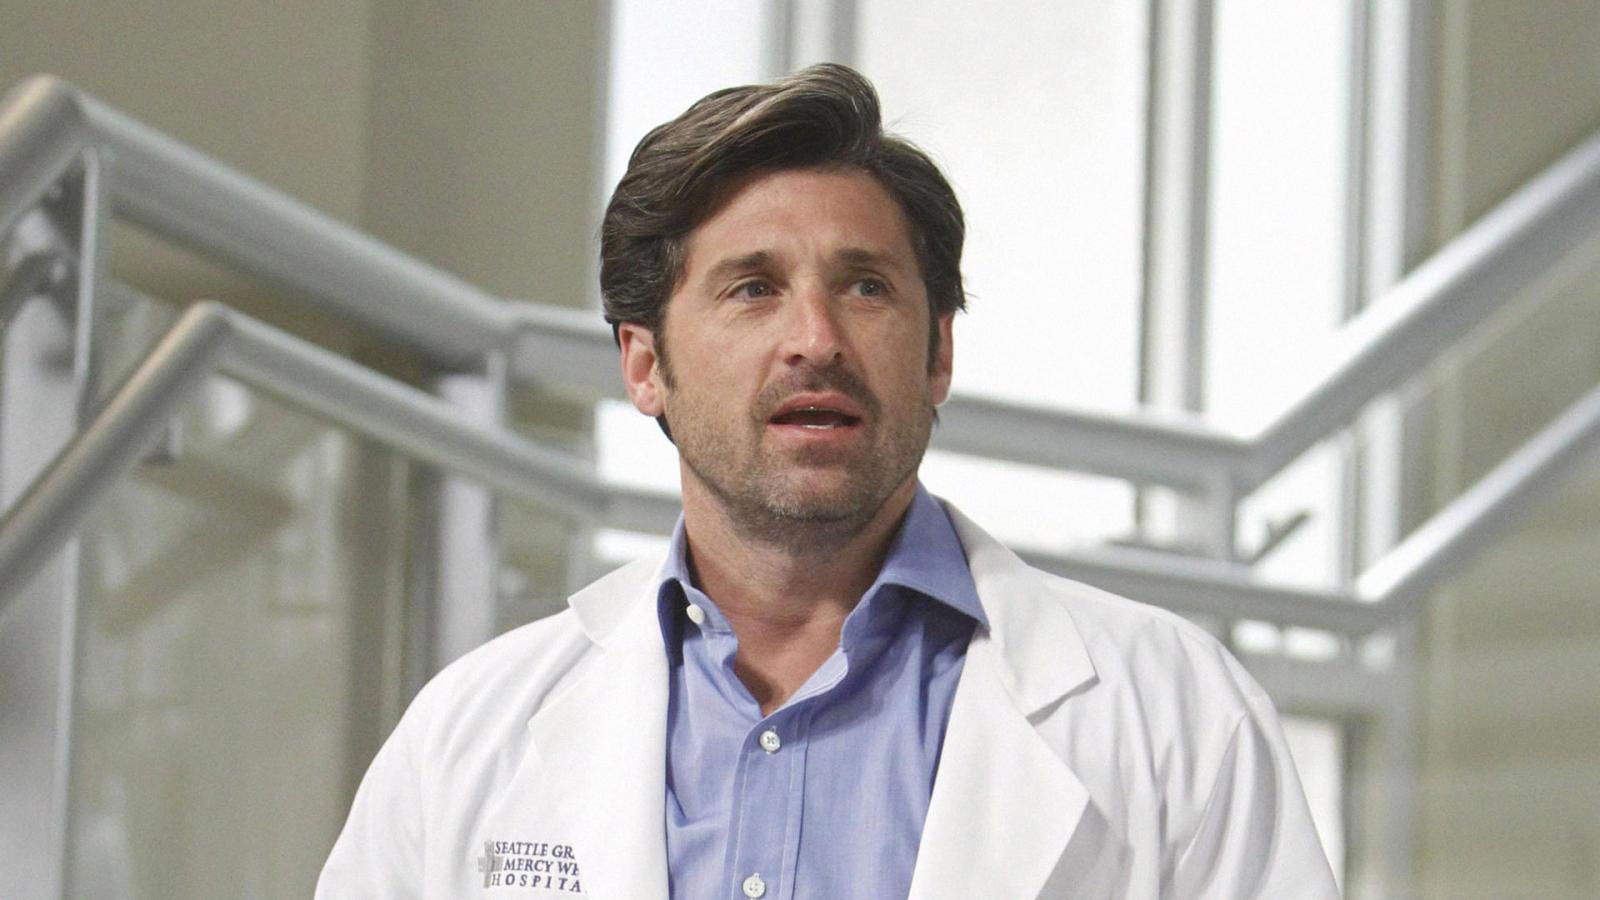 Where Are They Now? Top 7 Sexiest Doctors On TV - image 3